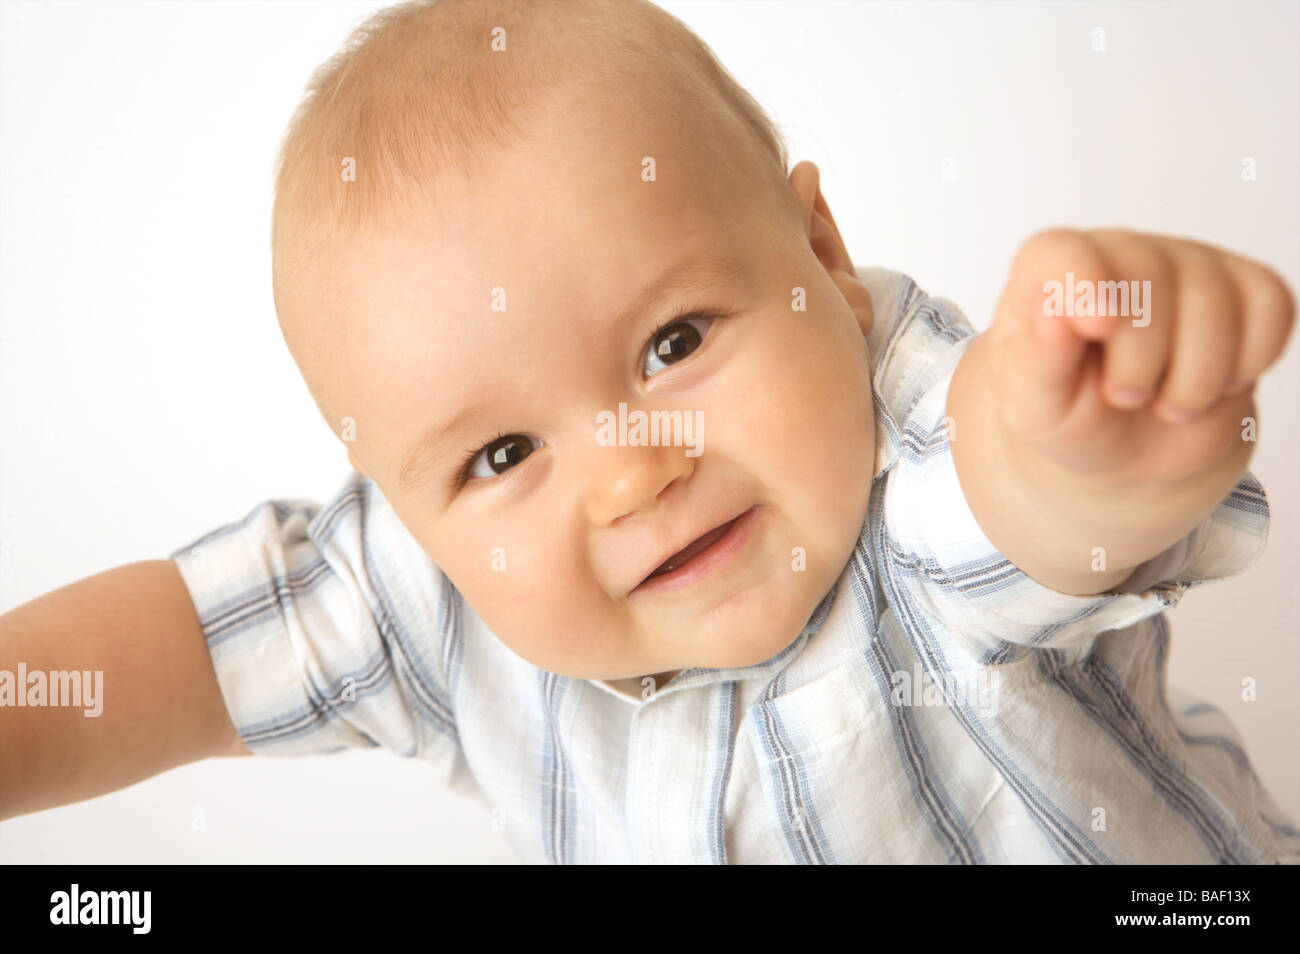 A smiling baby wearing a shirt reaches up to camera Stock Photo